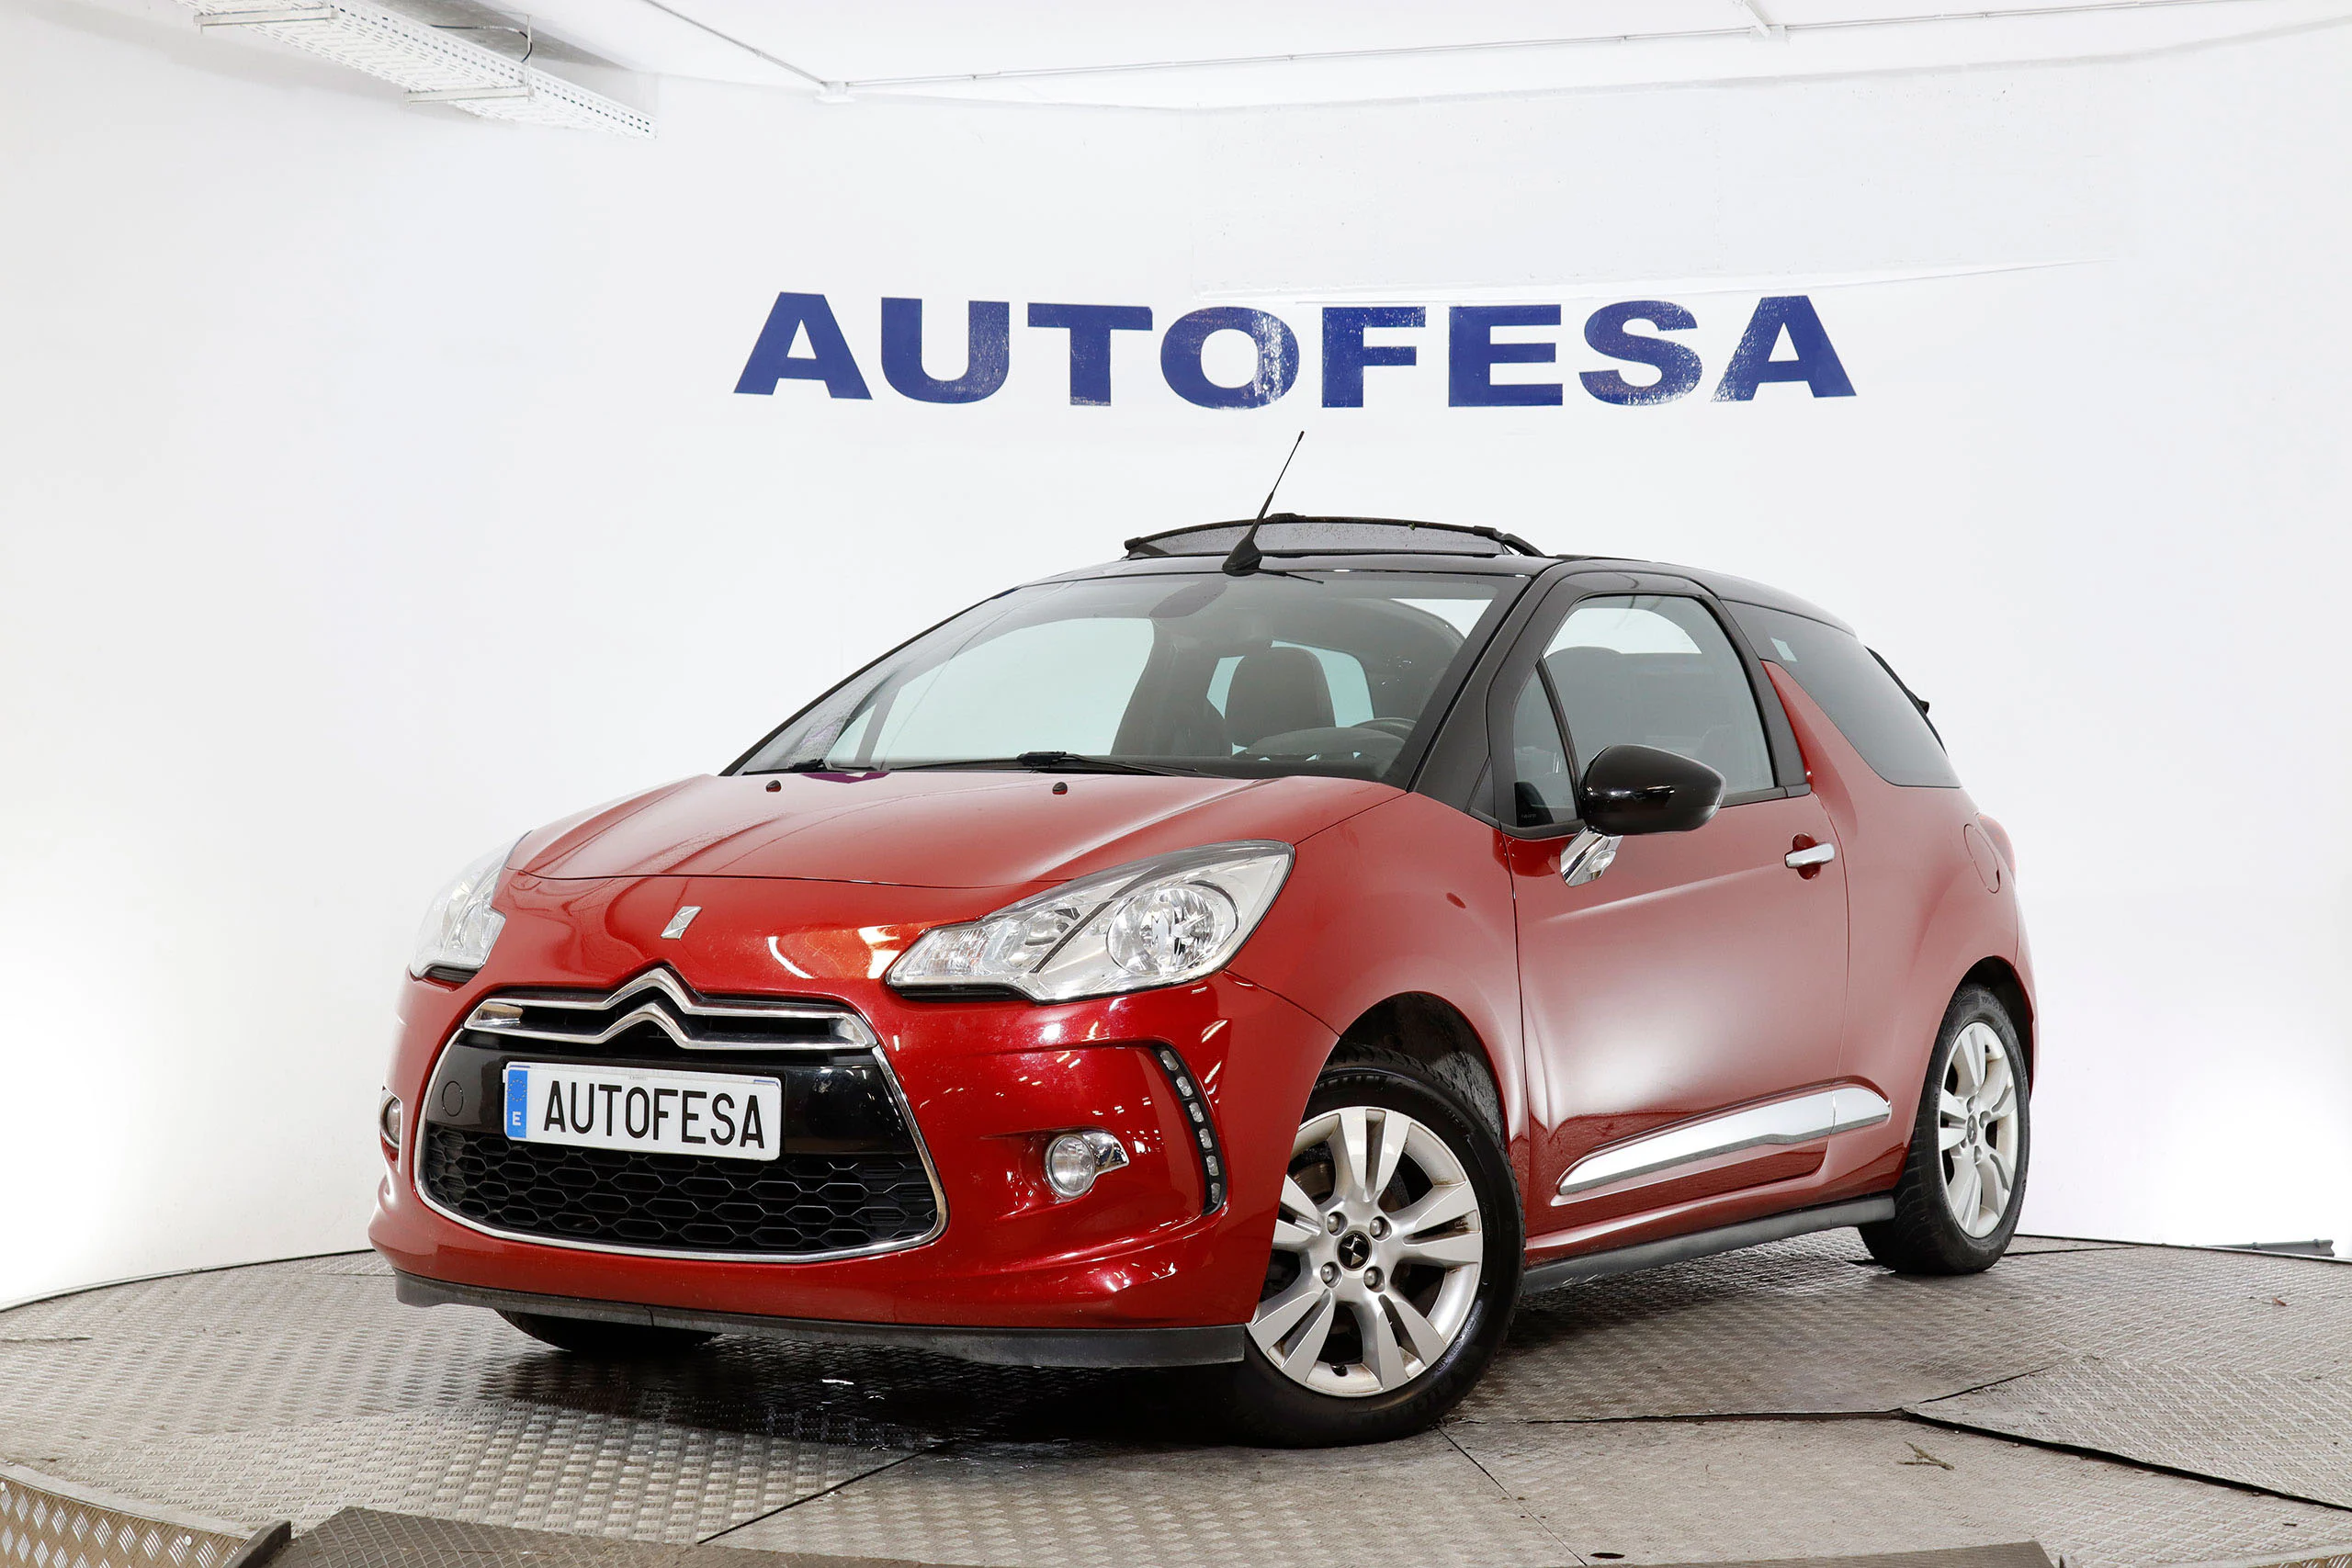 DS DS 3 1.2 CABRIO 110cv SO CHIC 3P S/S # NAVY, PARKTRONIC - Foto 1